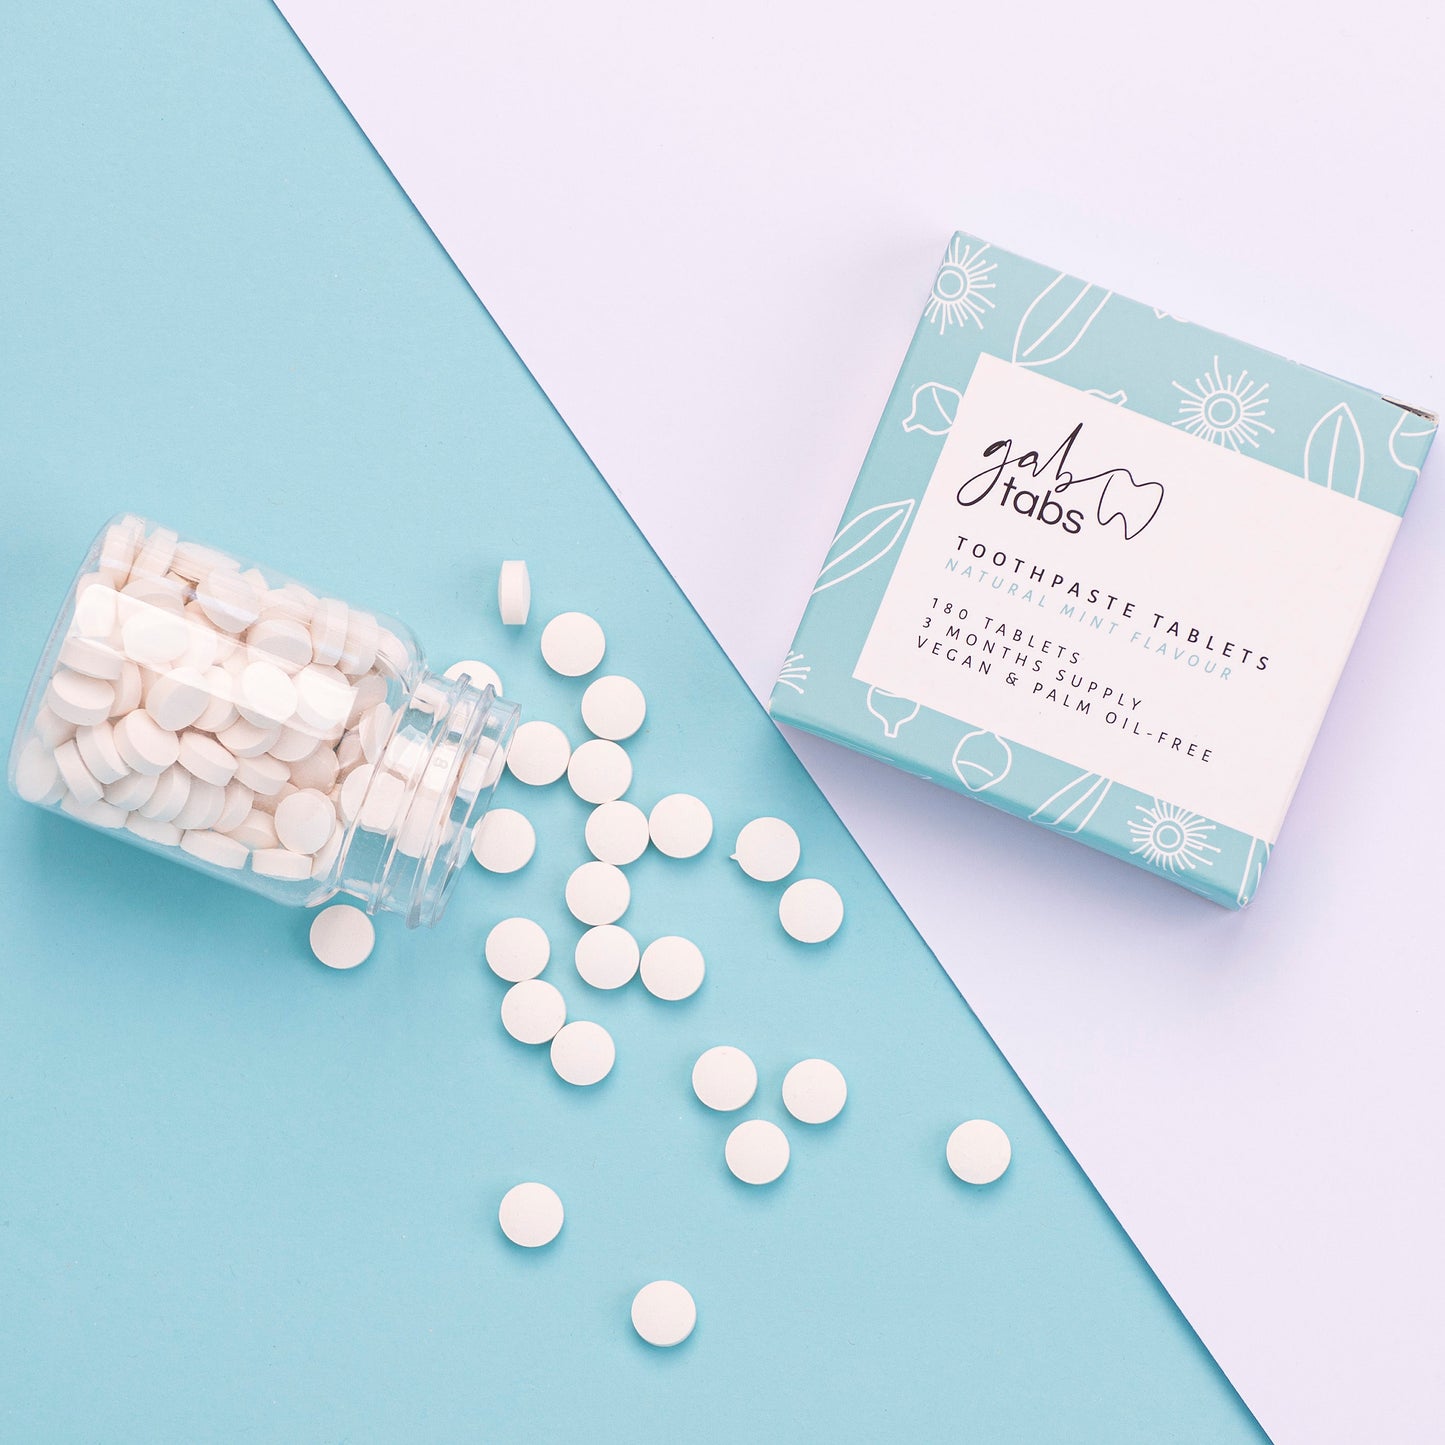 Mint Toothpaste Tablets (3 months supply)